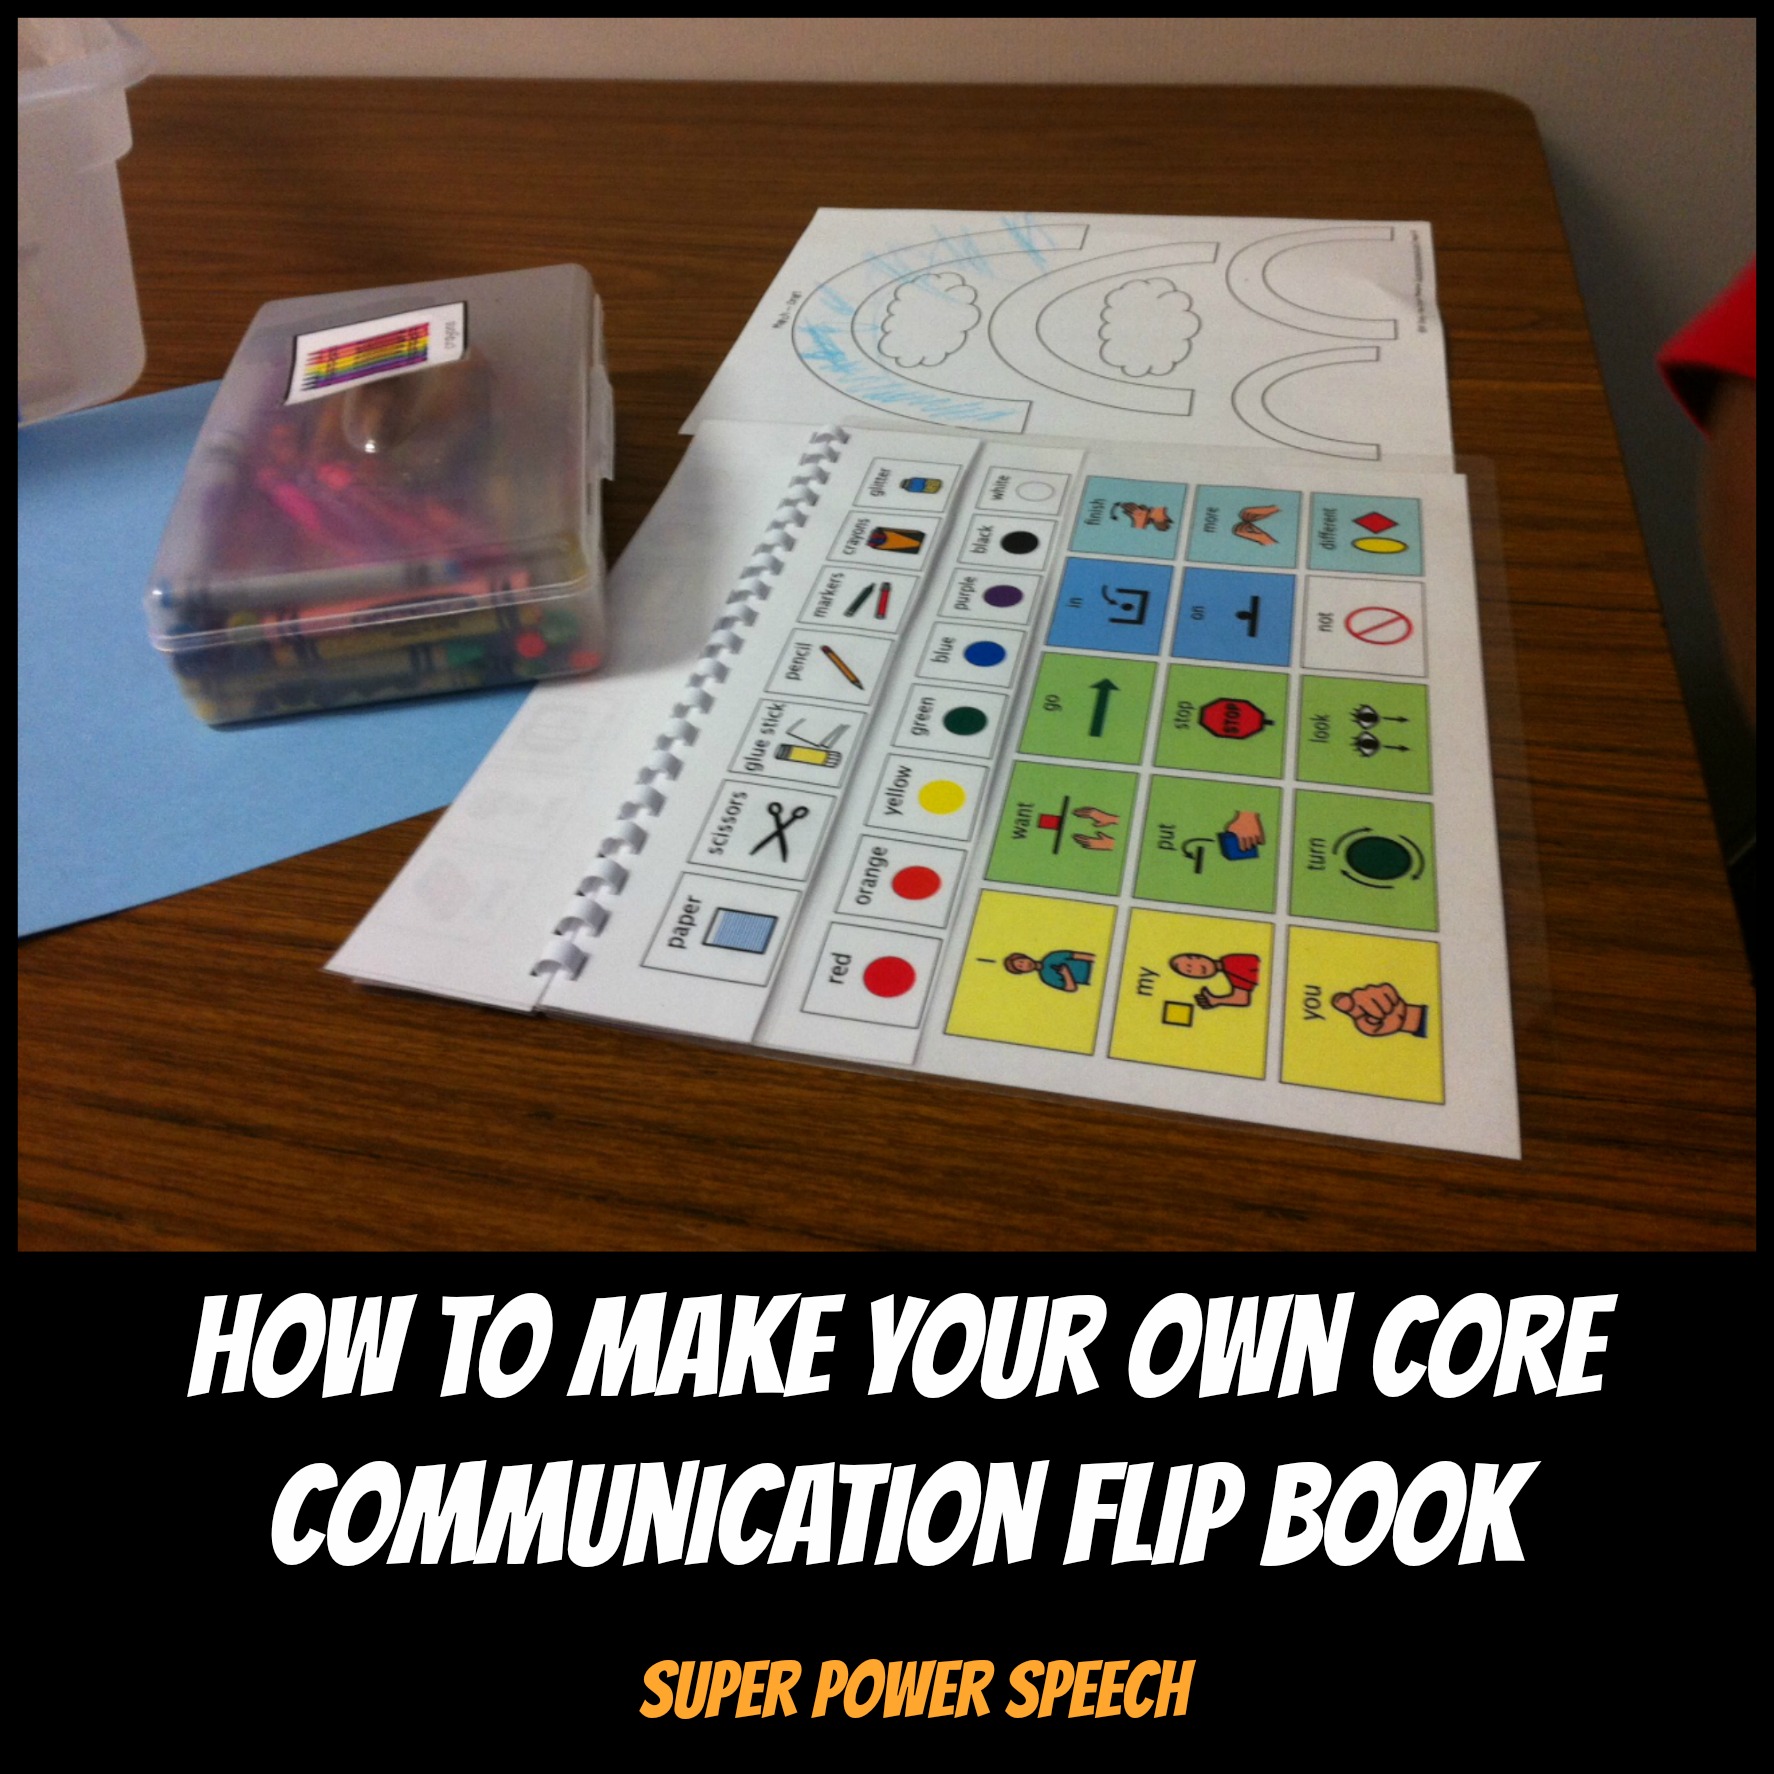 How to Make Your Own Core Communication Flip Book